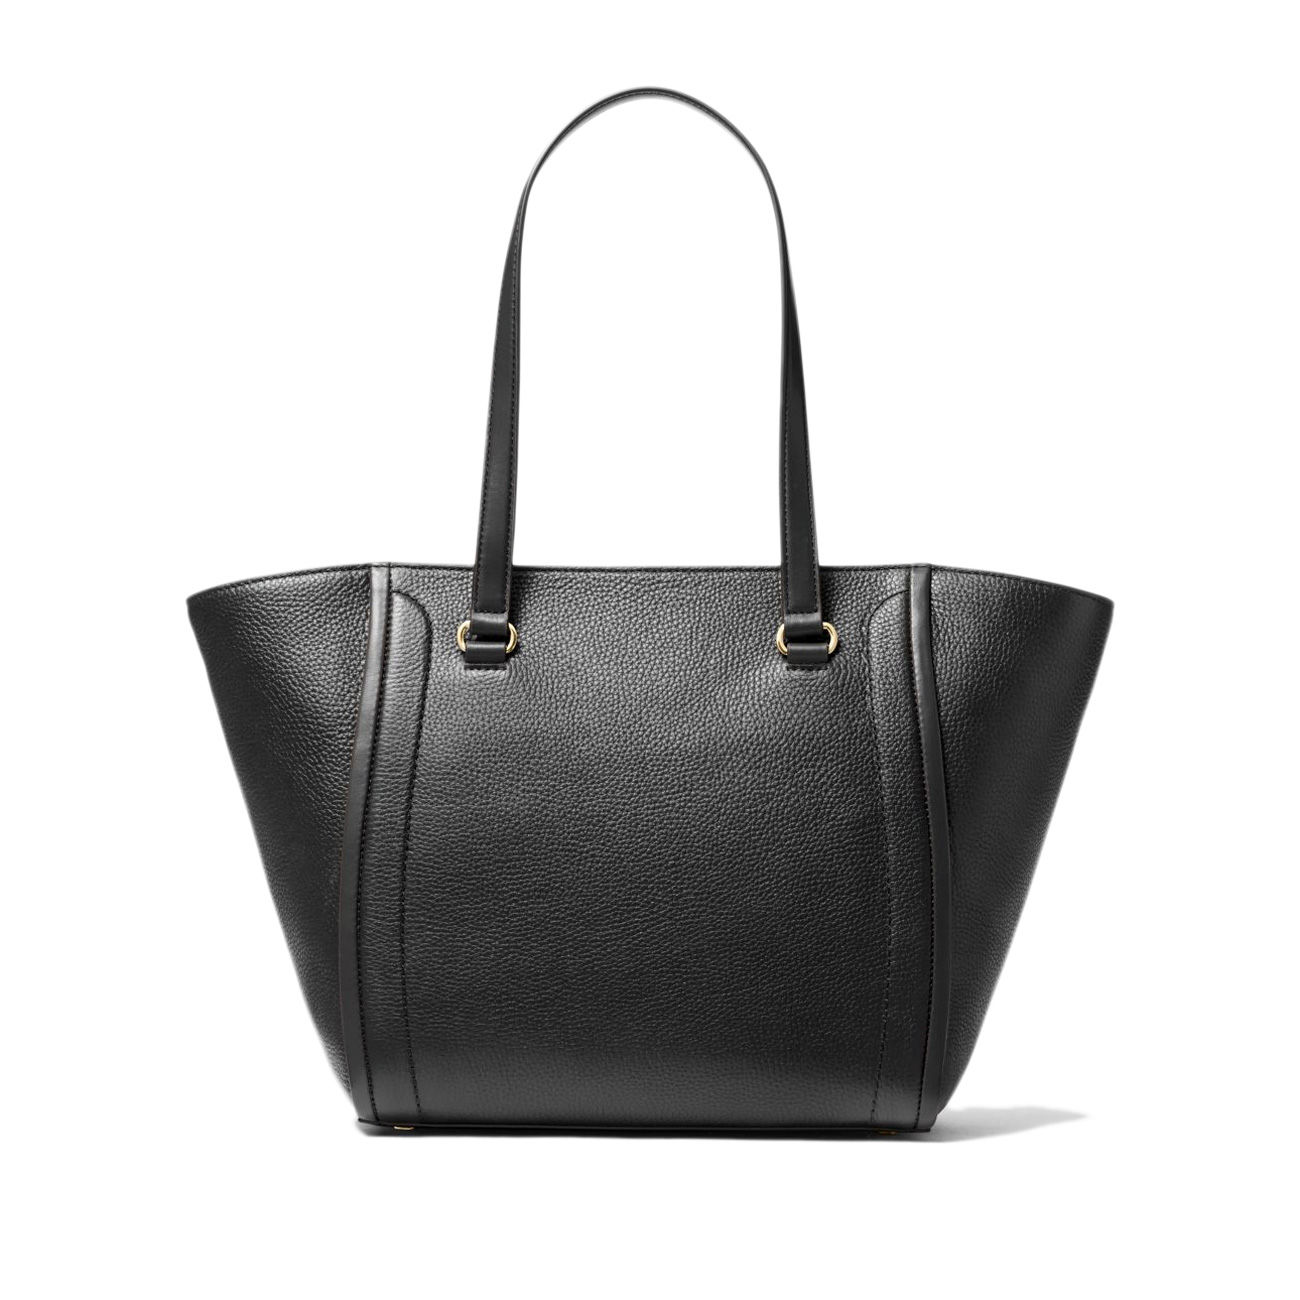 MICHAEL KORS TOTE BAG IN HAMMERED LEATHER Woman Leather